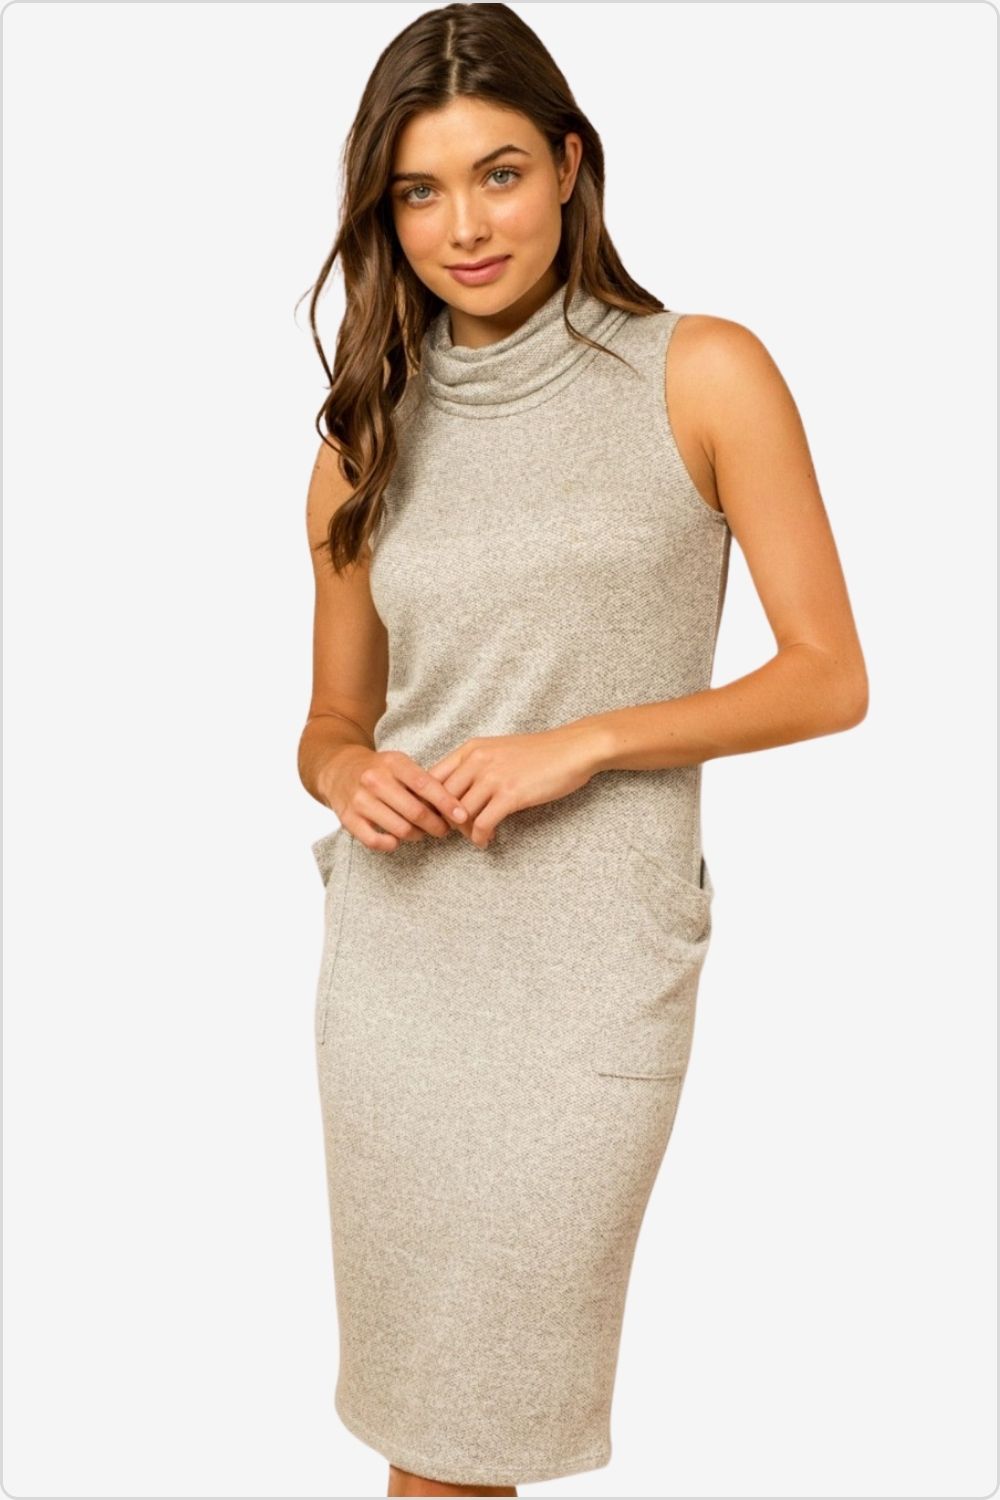 Elegant cowl neck sleeveless dress featuring practical pockets, perfect for summer styling,  Color Heather Grey